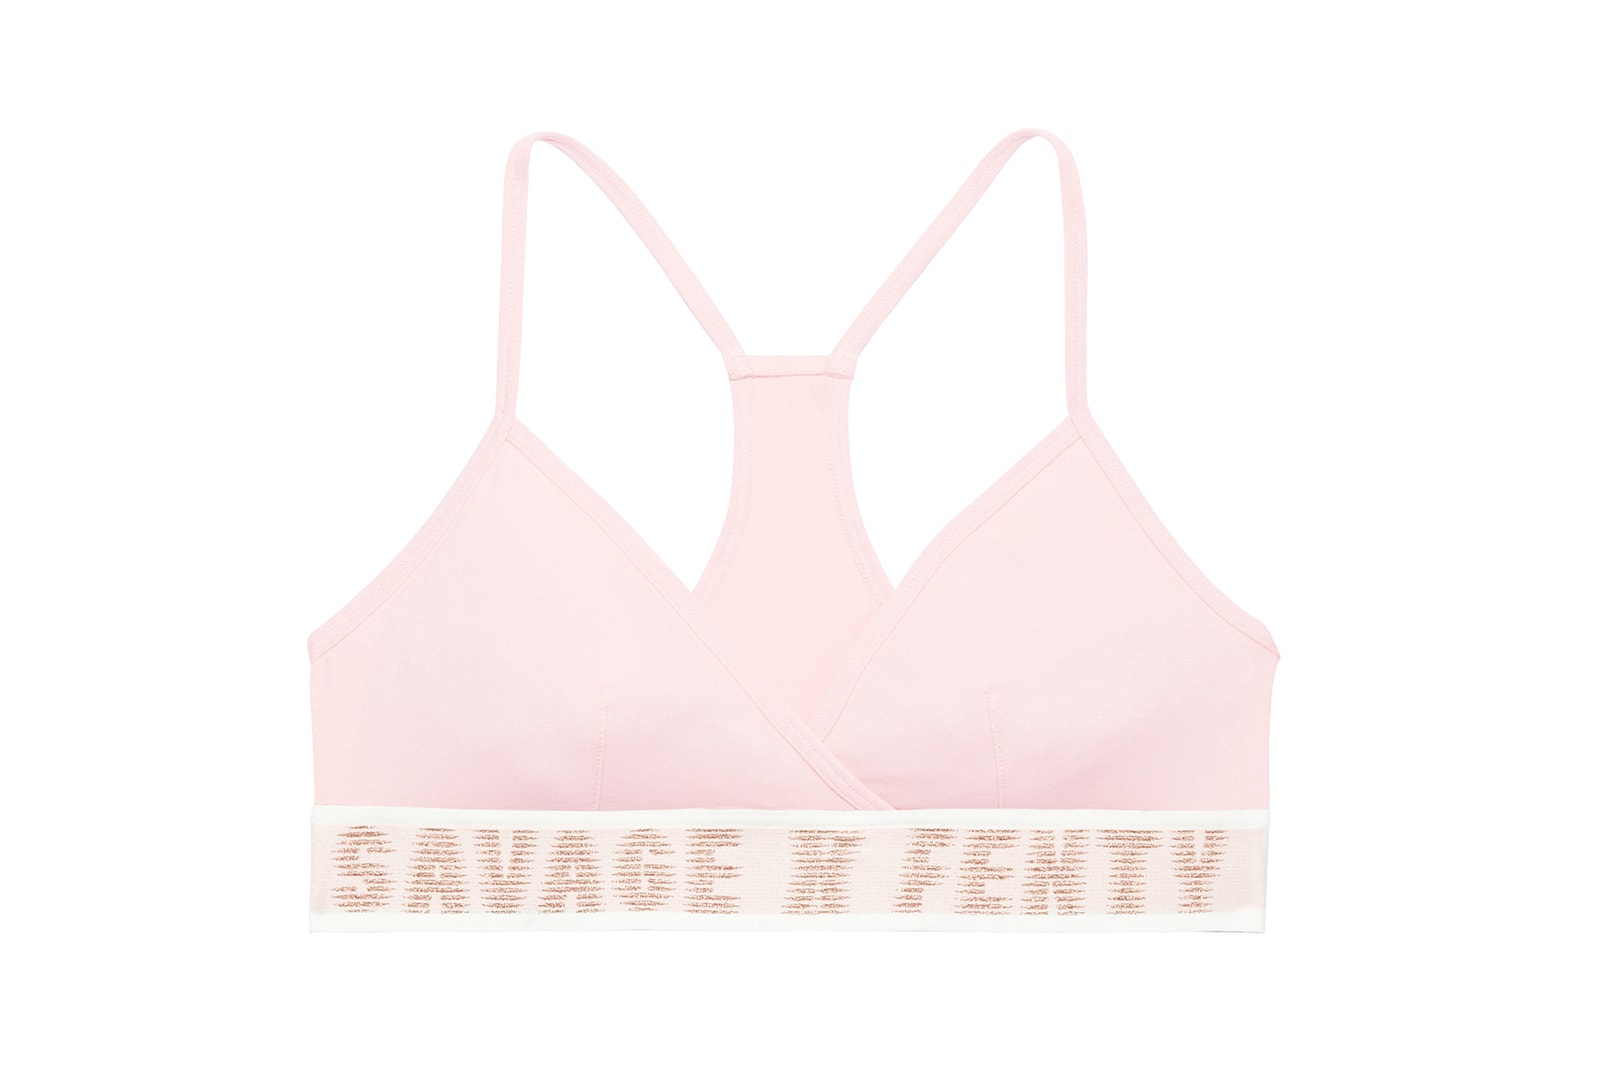 Rihanna Savage X Fenty Breast Cancer Awareness Month 2020 Collection Campaign Bra Nykia